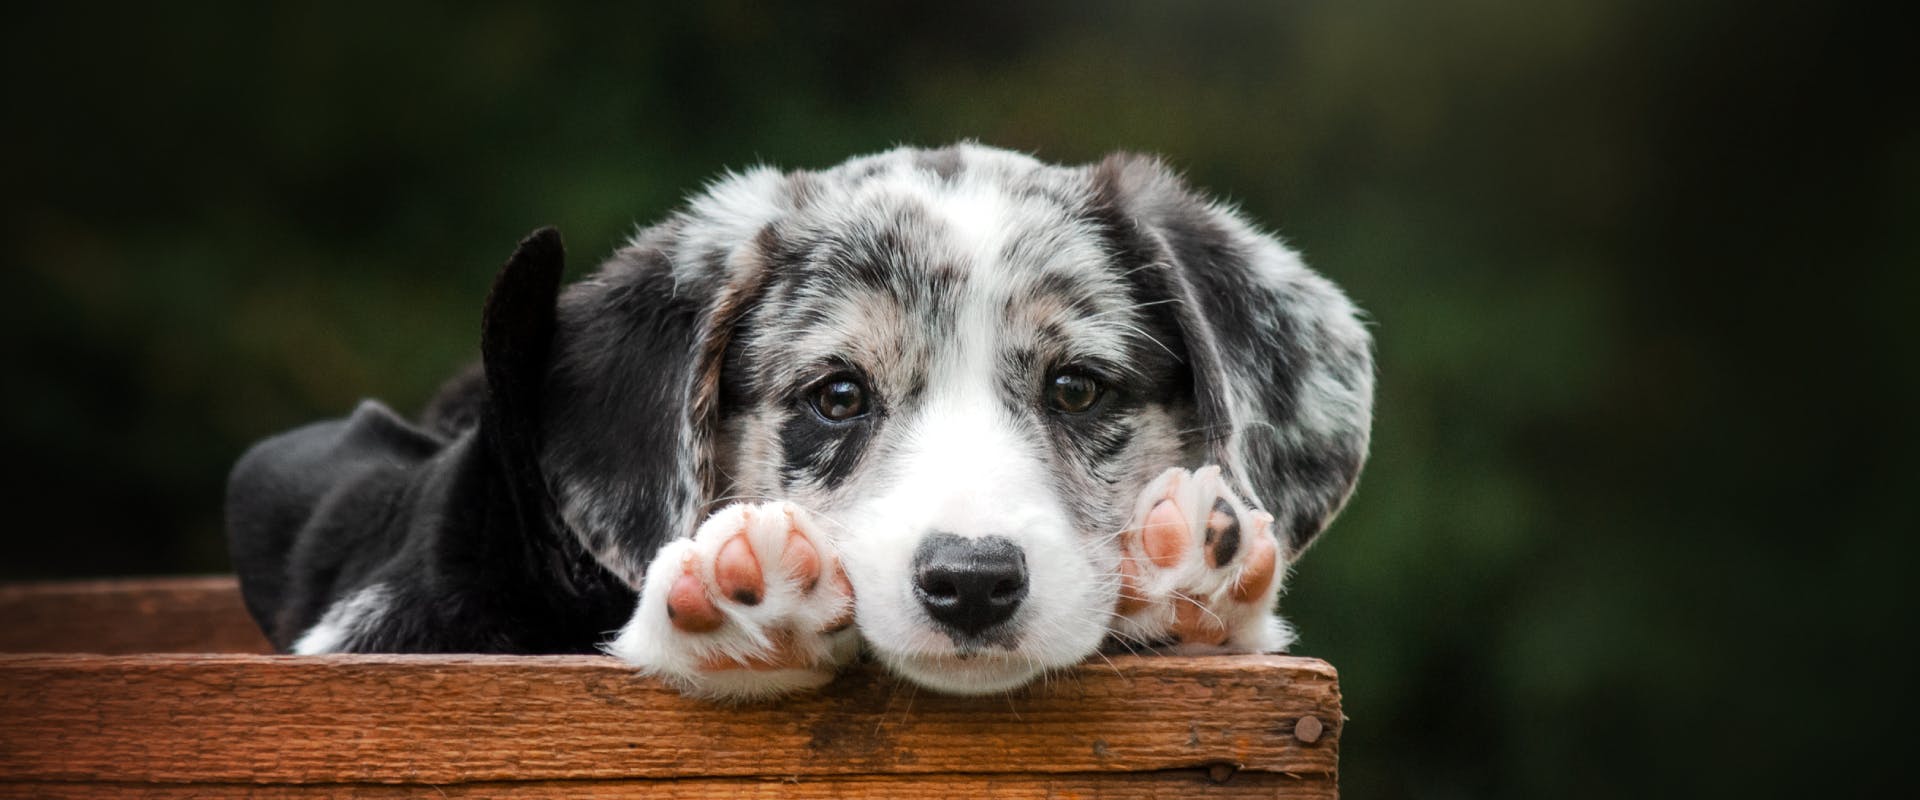 a blue merle Australian shepherd puppy with its face and front paws peeking over a wooden box